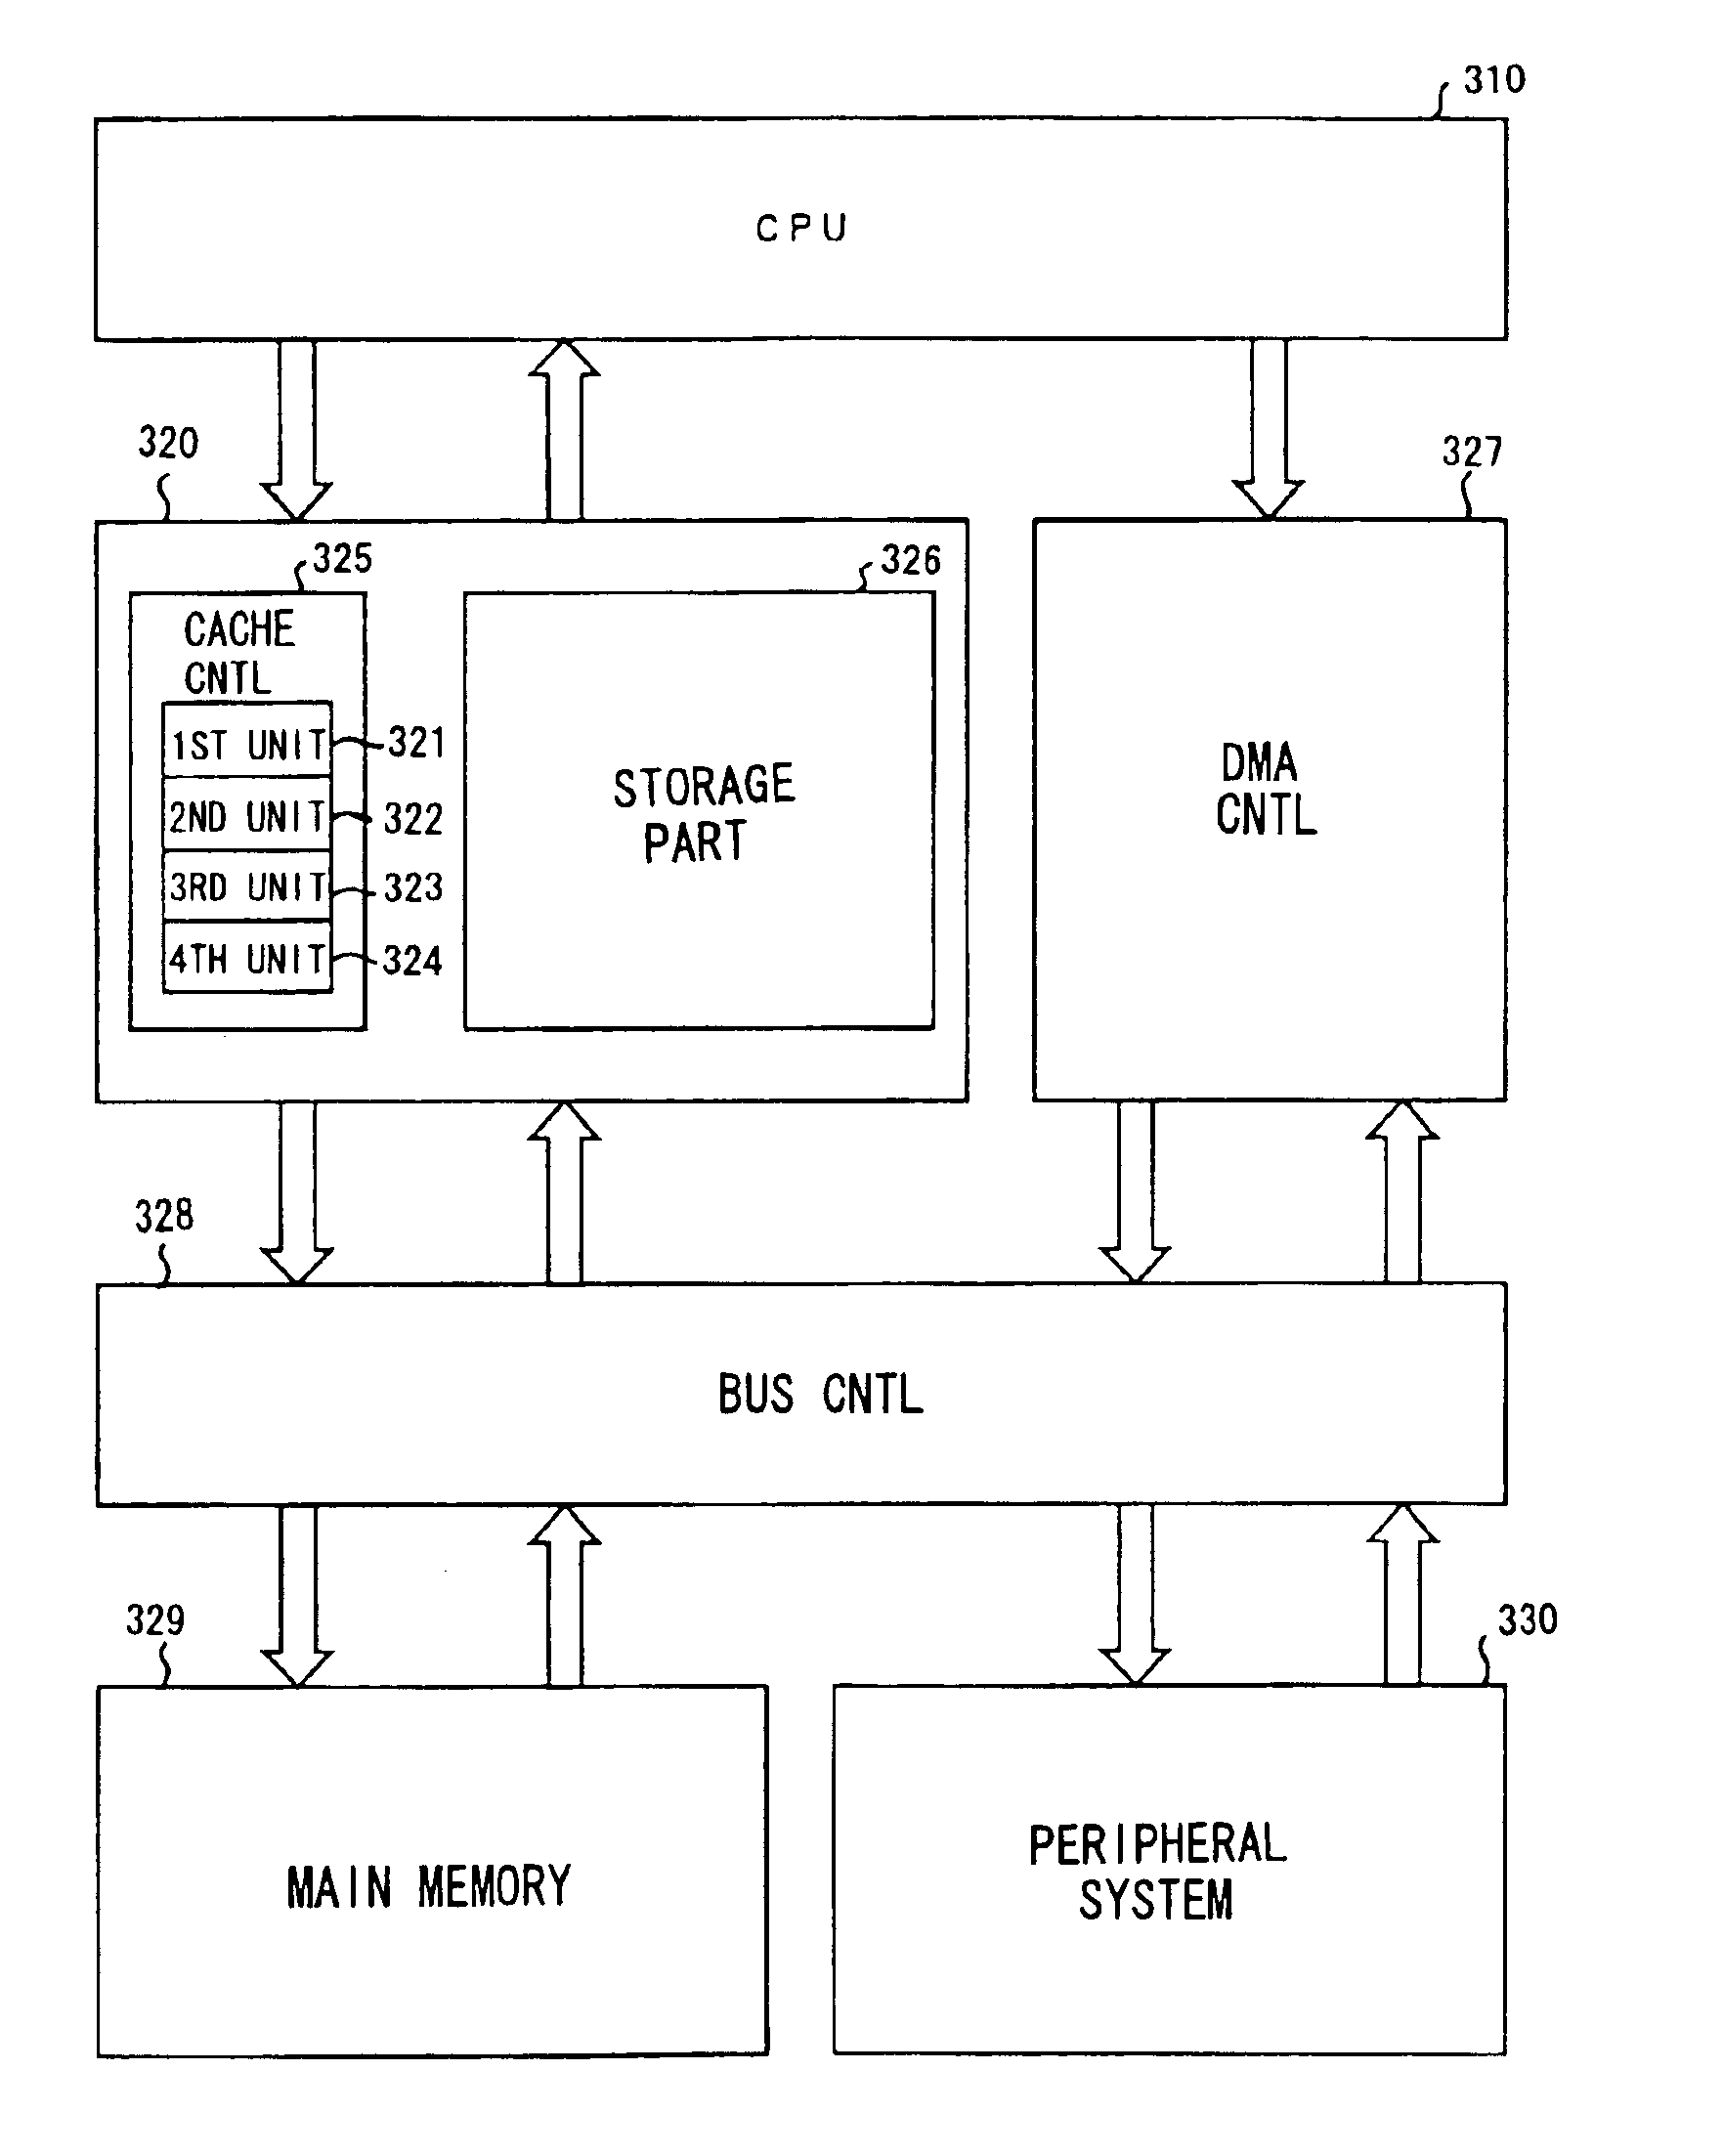 Method of Controlling and addressing a cache memory which acts as a random address memory to increase an access speed to a main memory